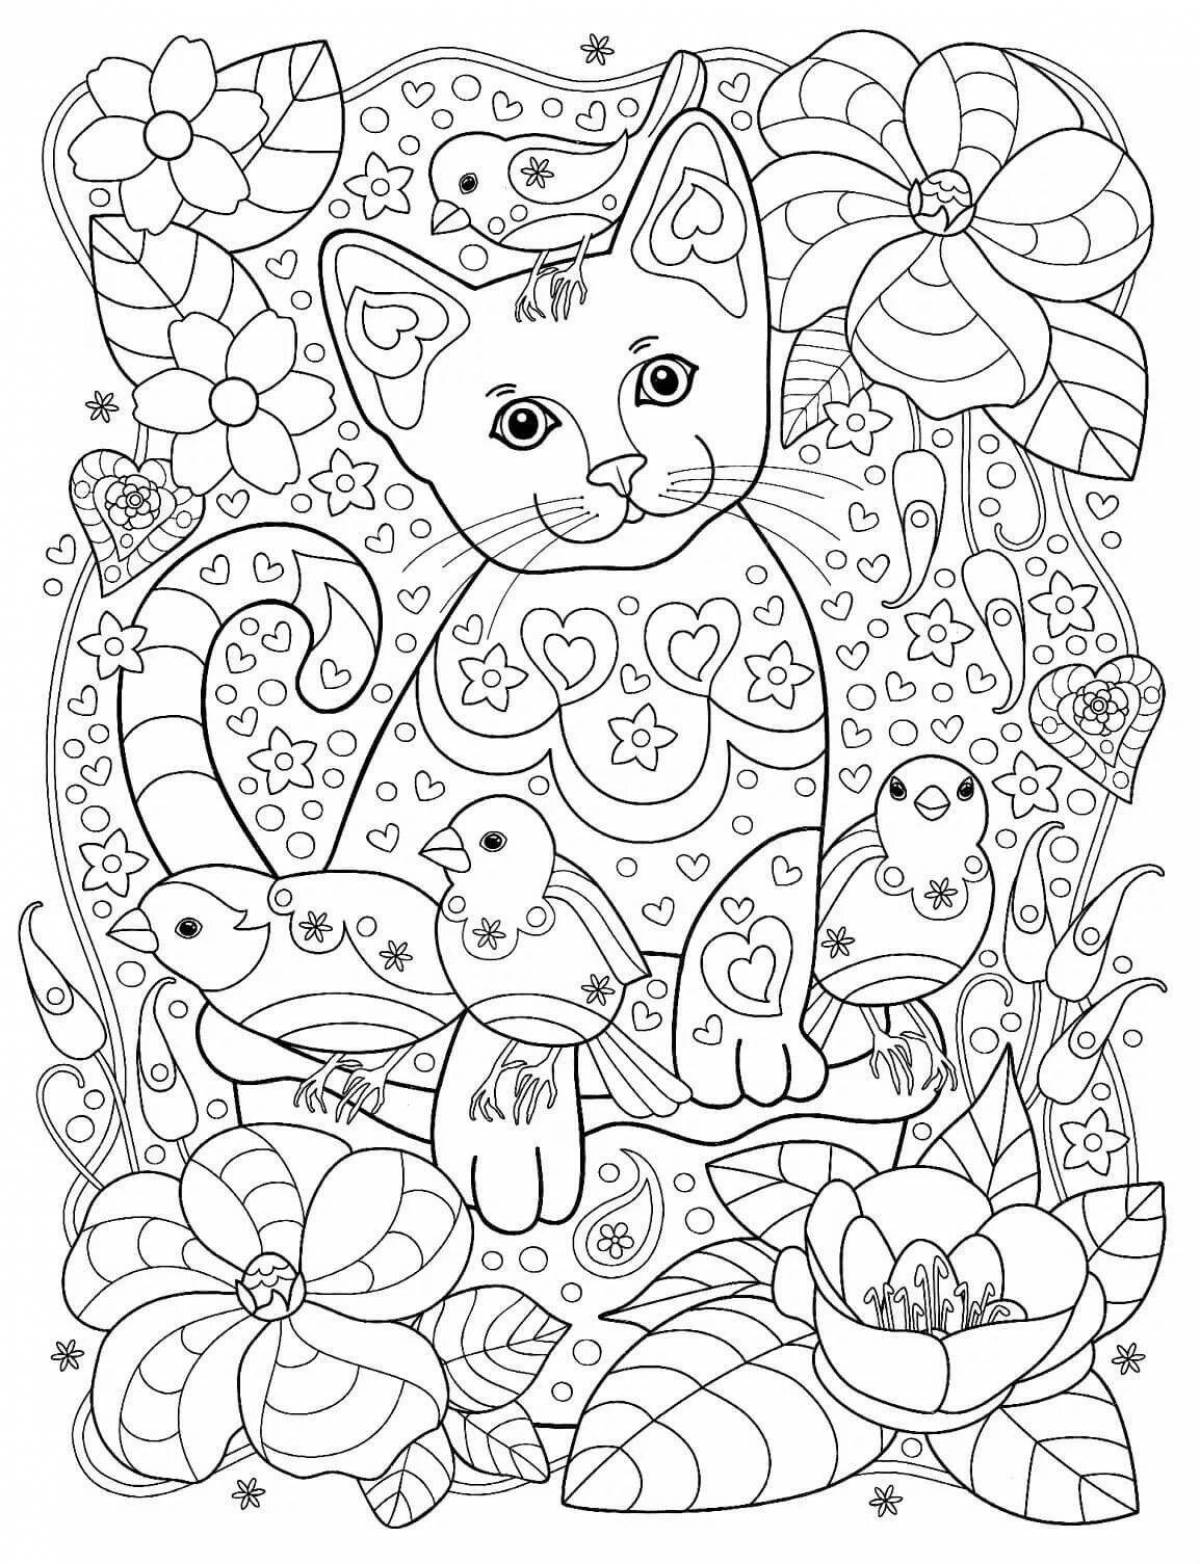 Naughty cat coloring by numbers